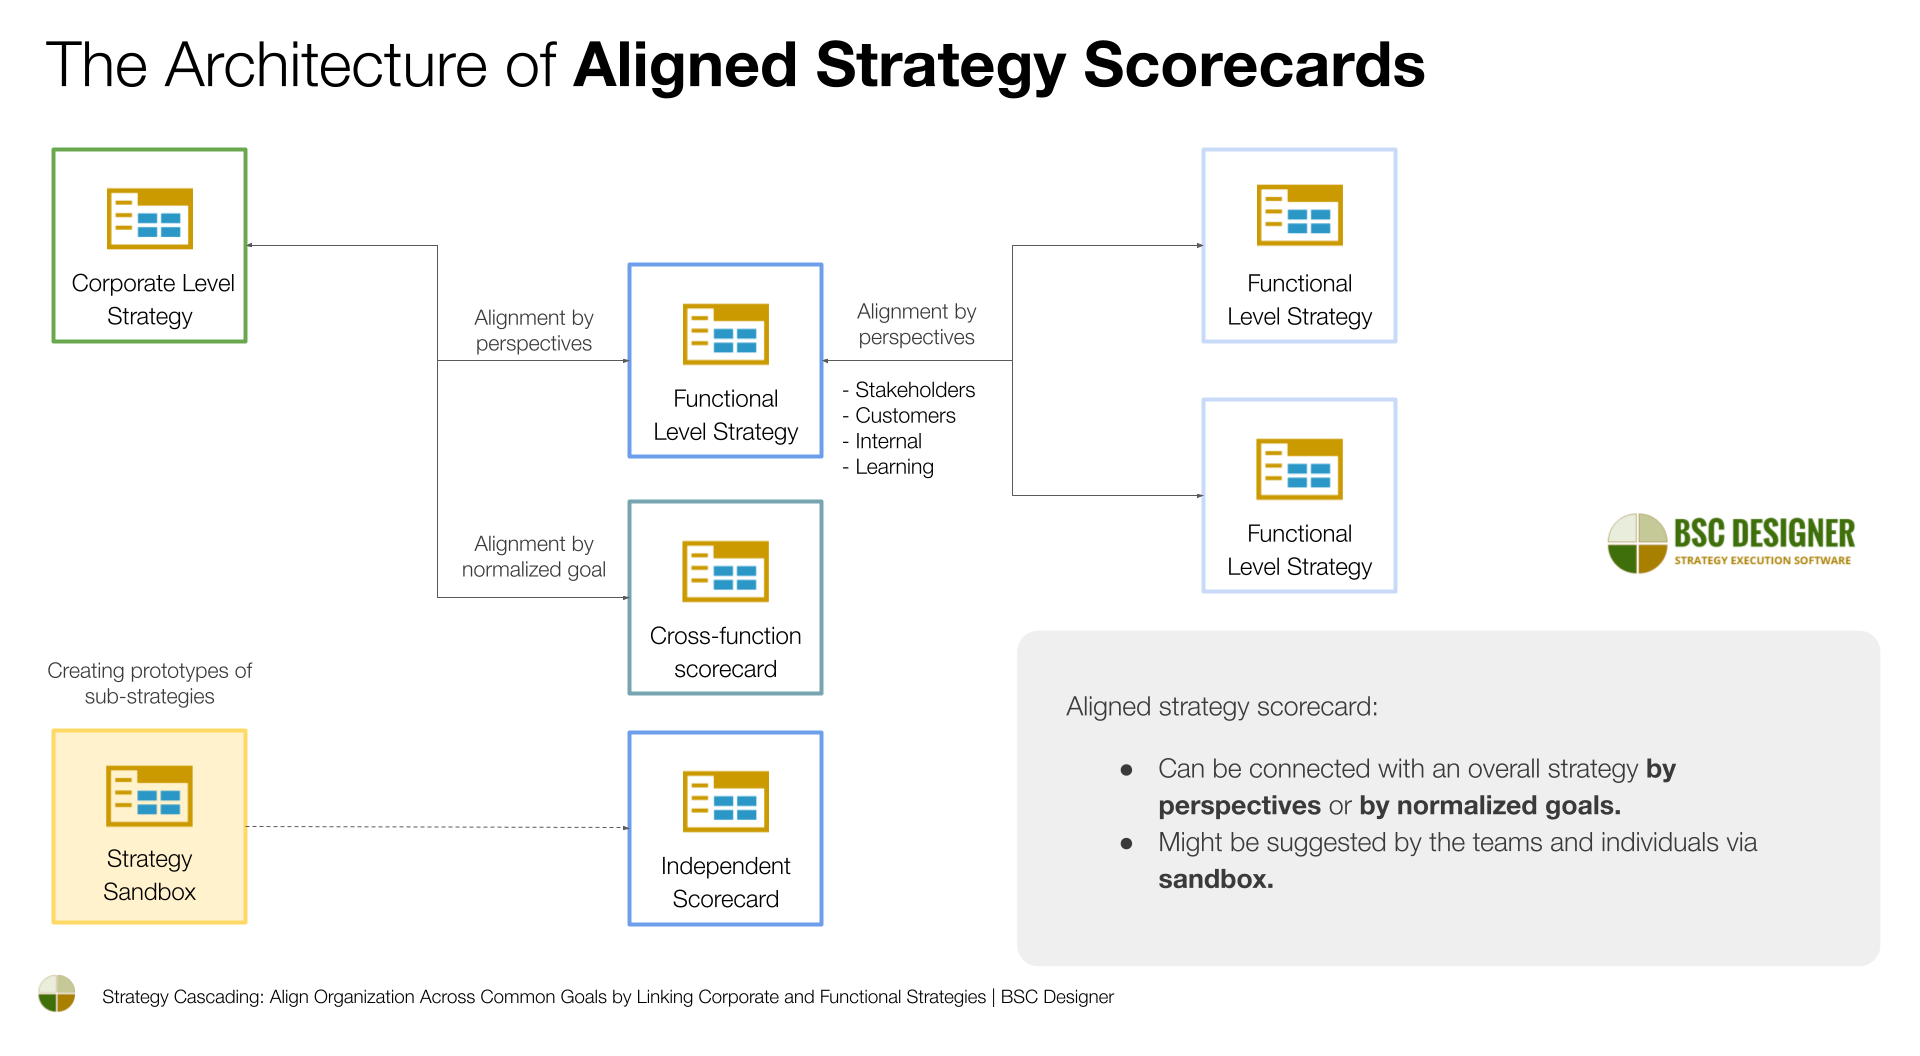 The Architecture of Aligned Strategy Scorecards